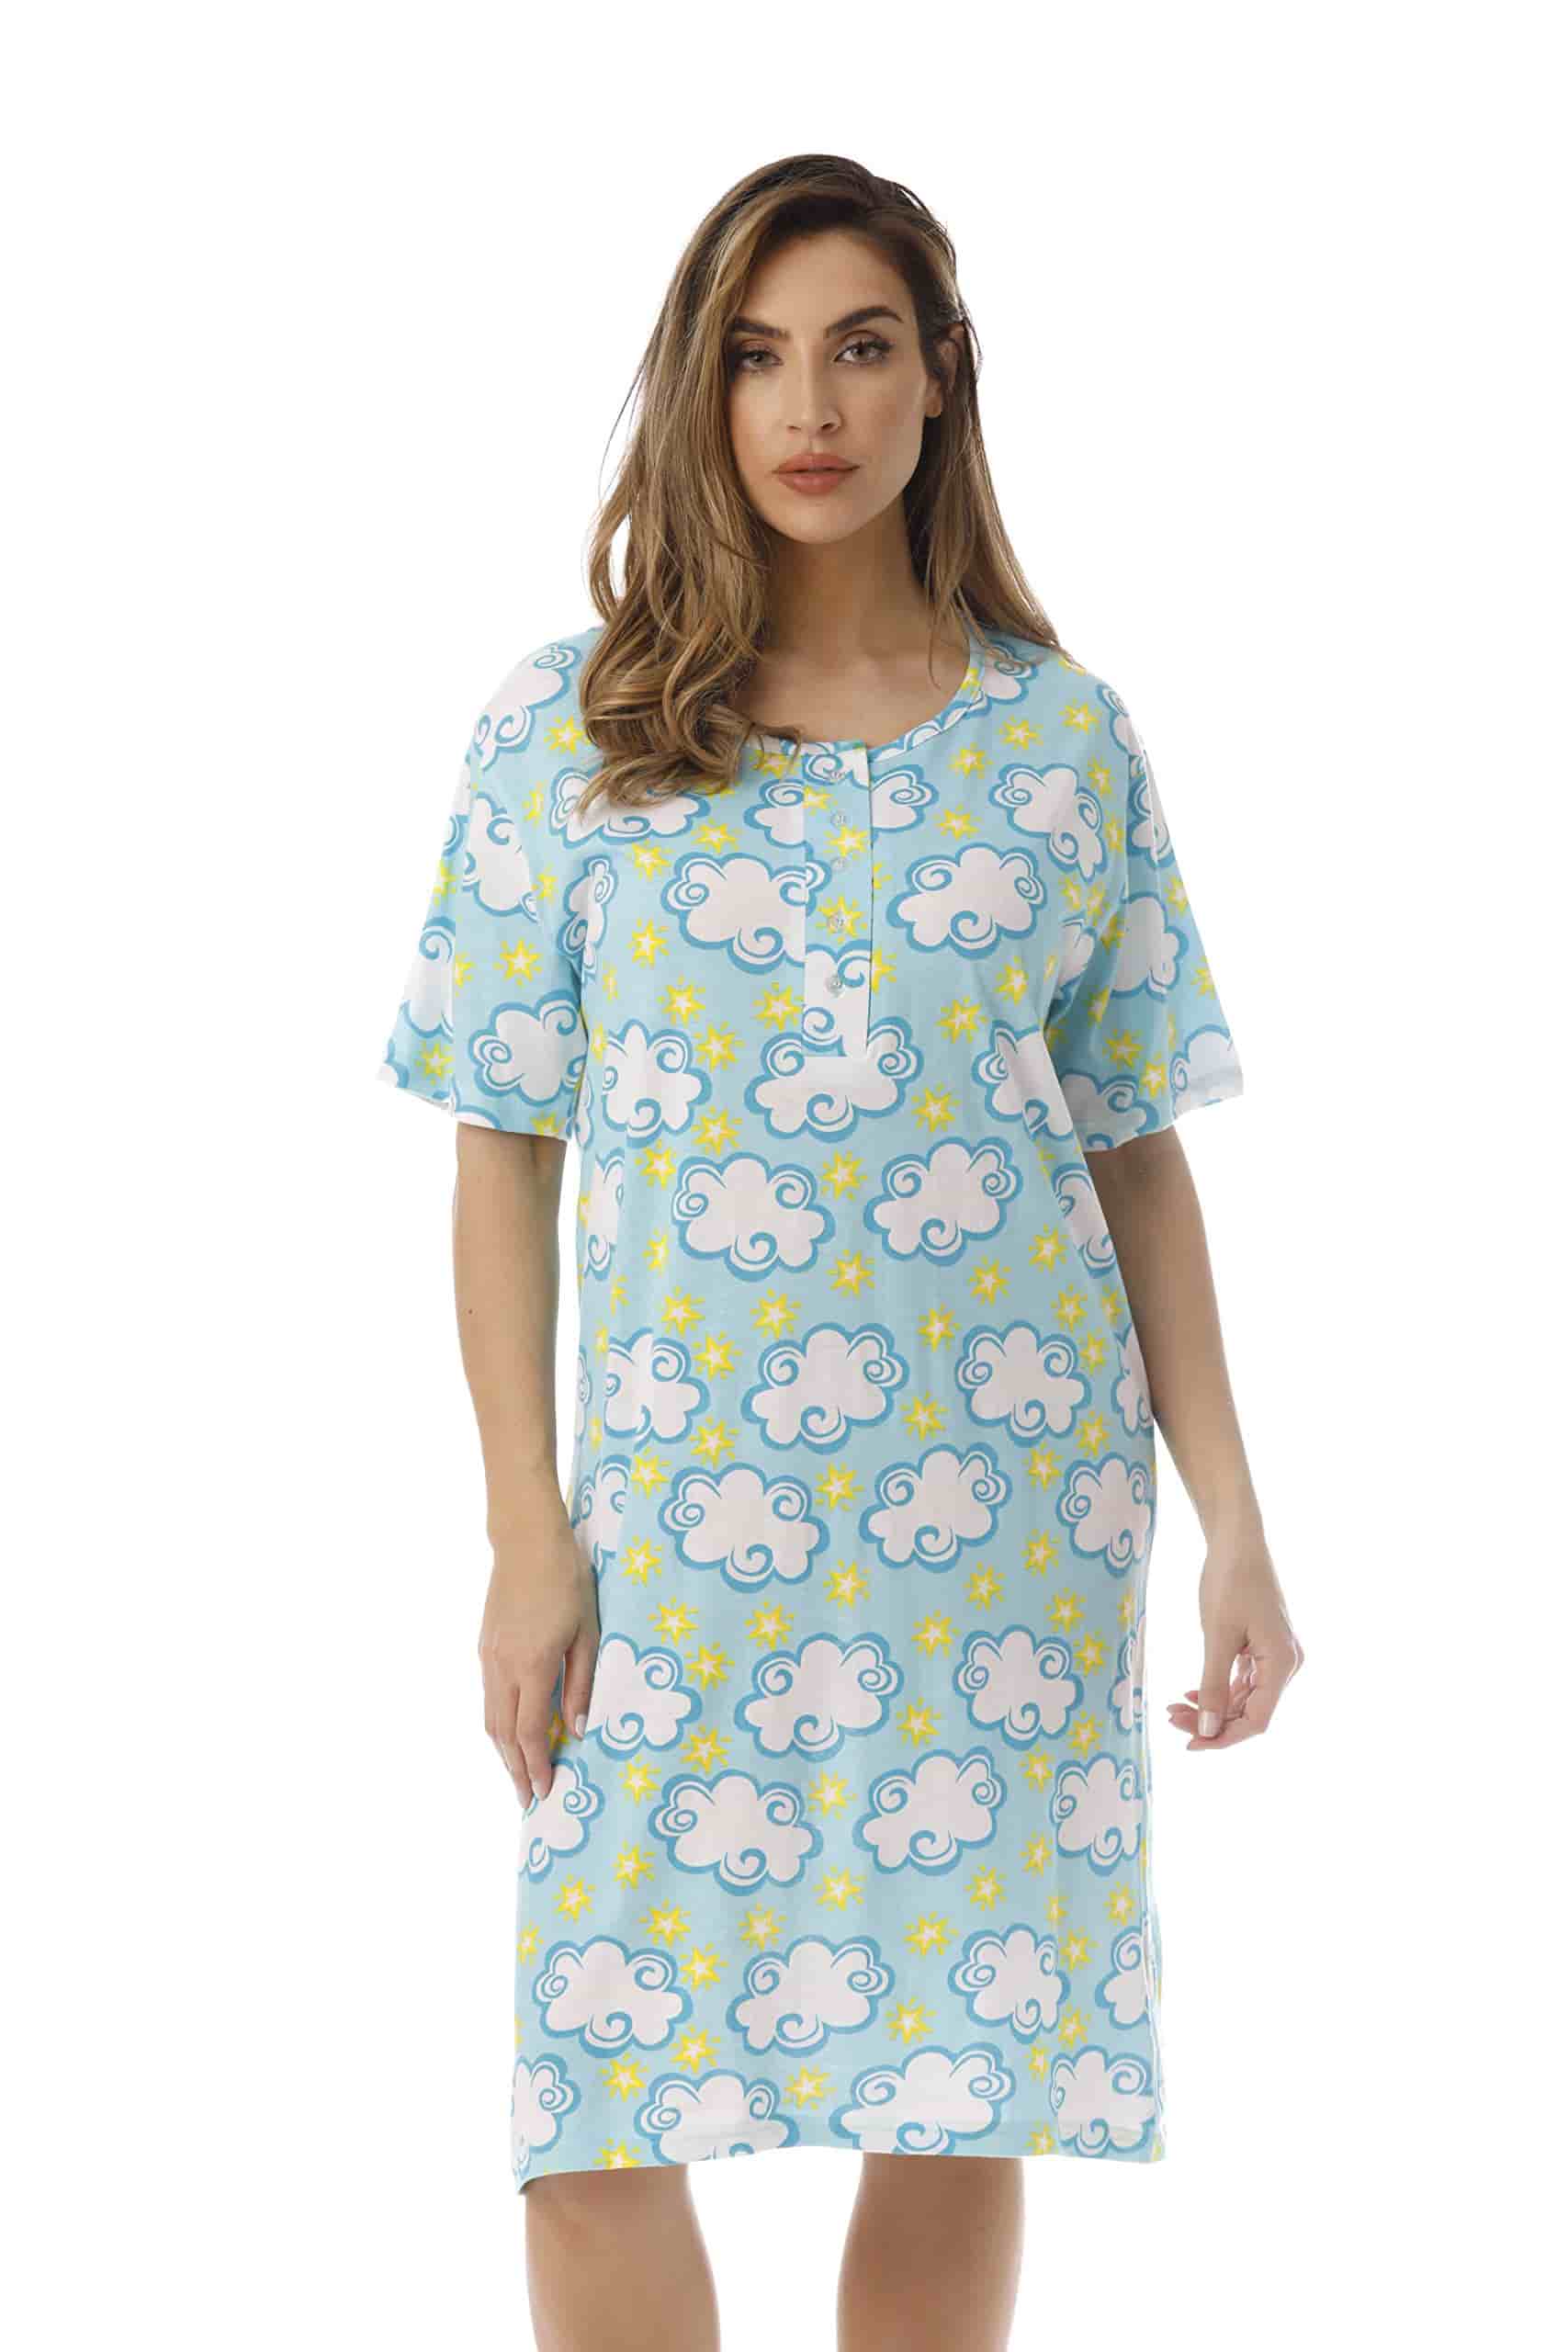 Short-Sleeve Nightgown by Just Love